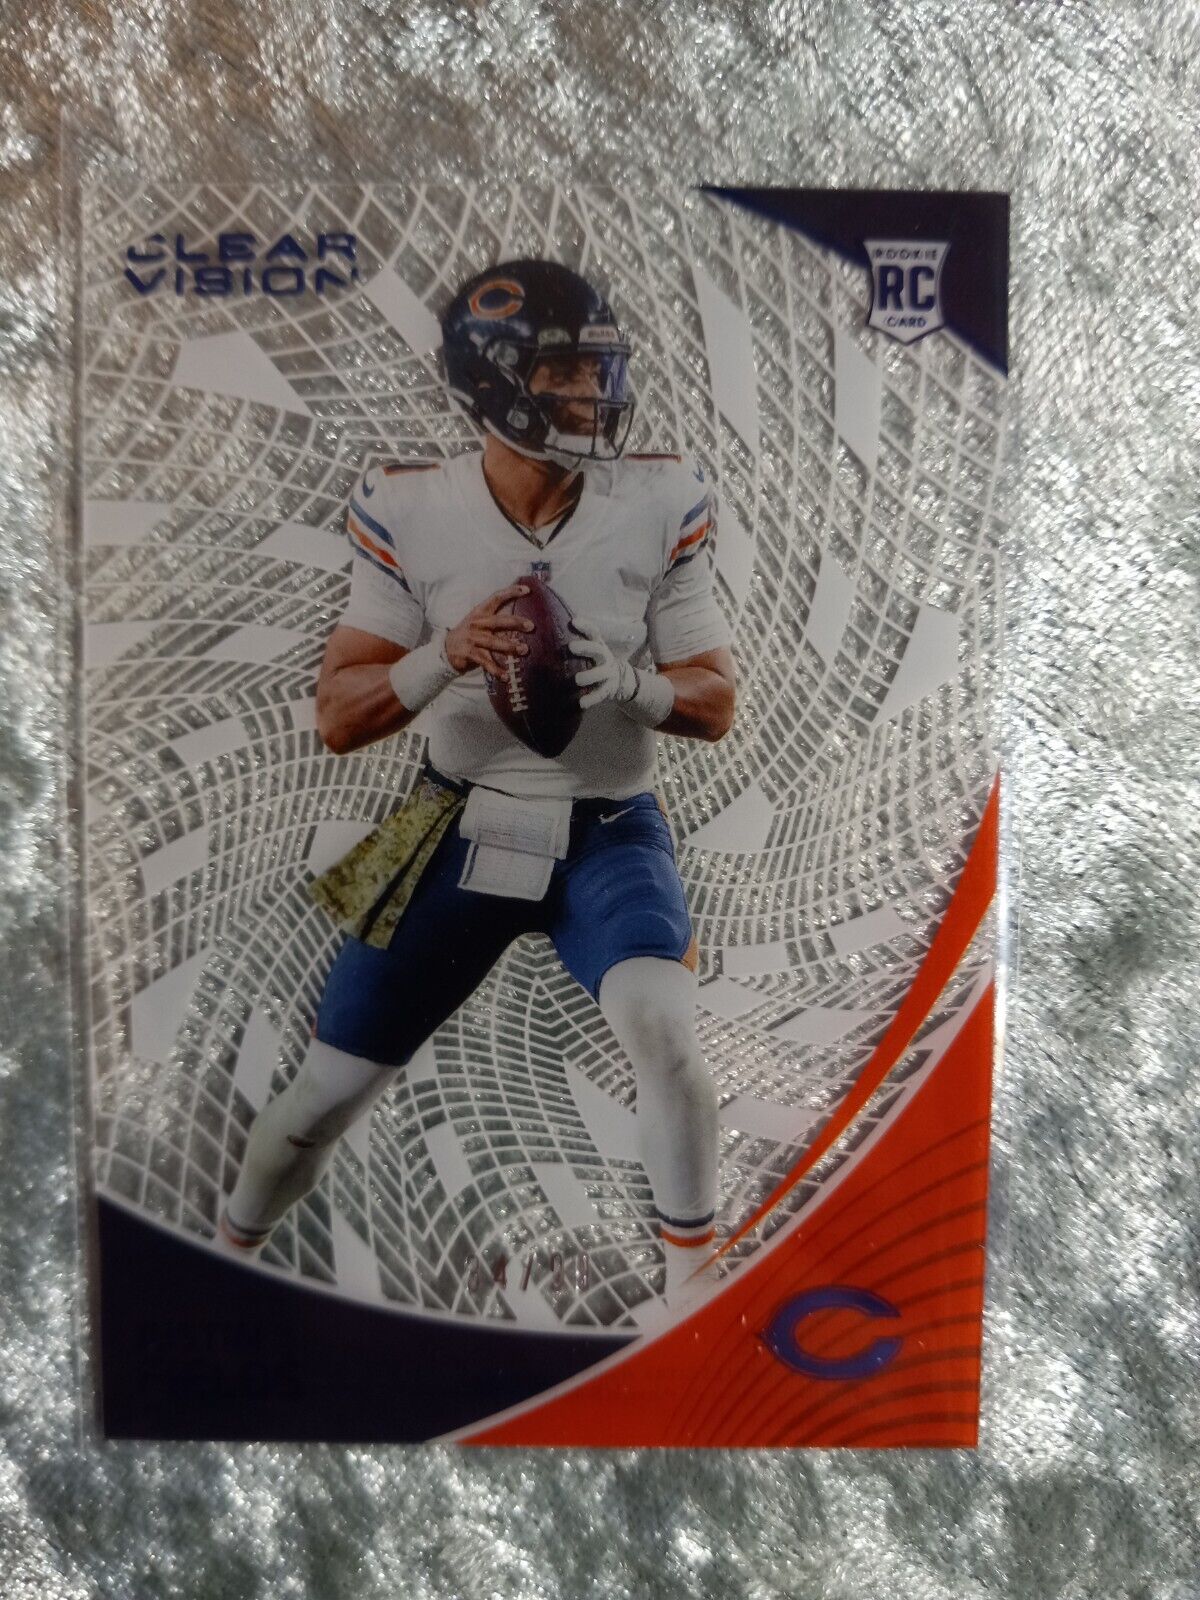 justin fields clear vision rookie card